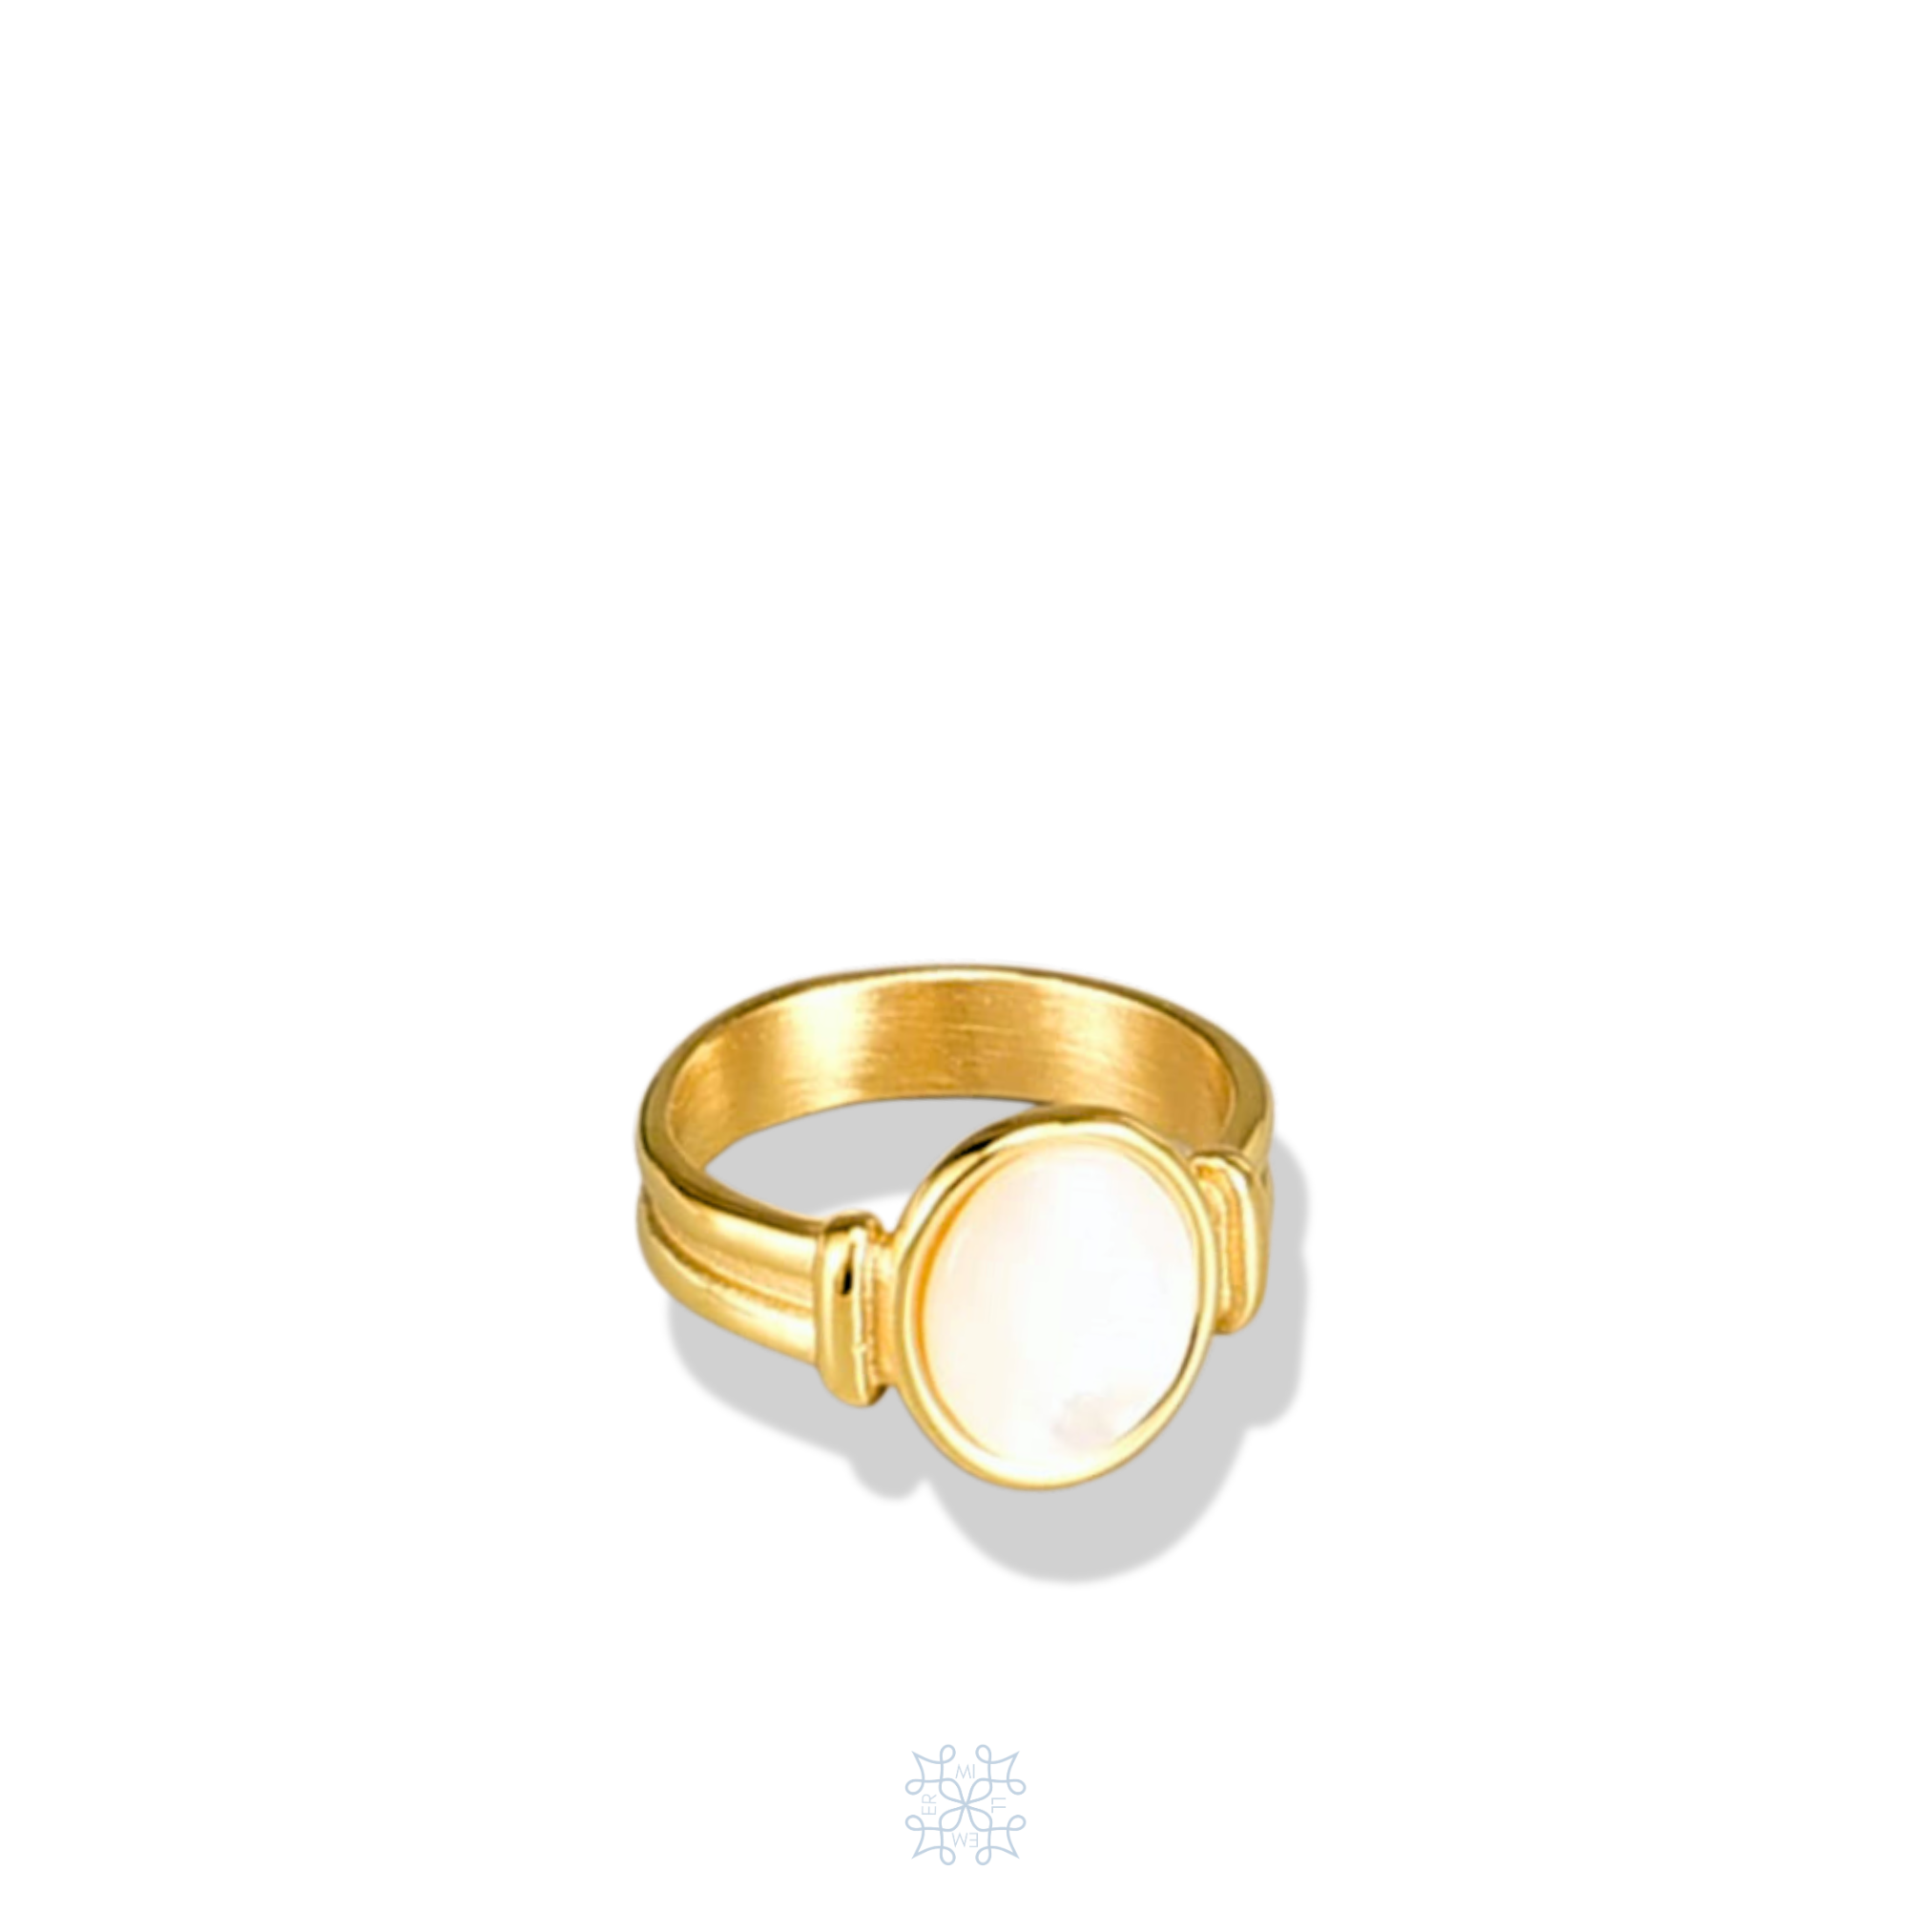 Mer Motherpearl gold ring. Gold ring with a white motherpearl on top.